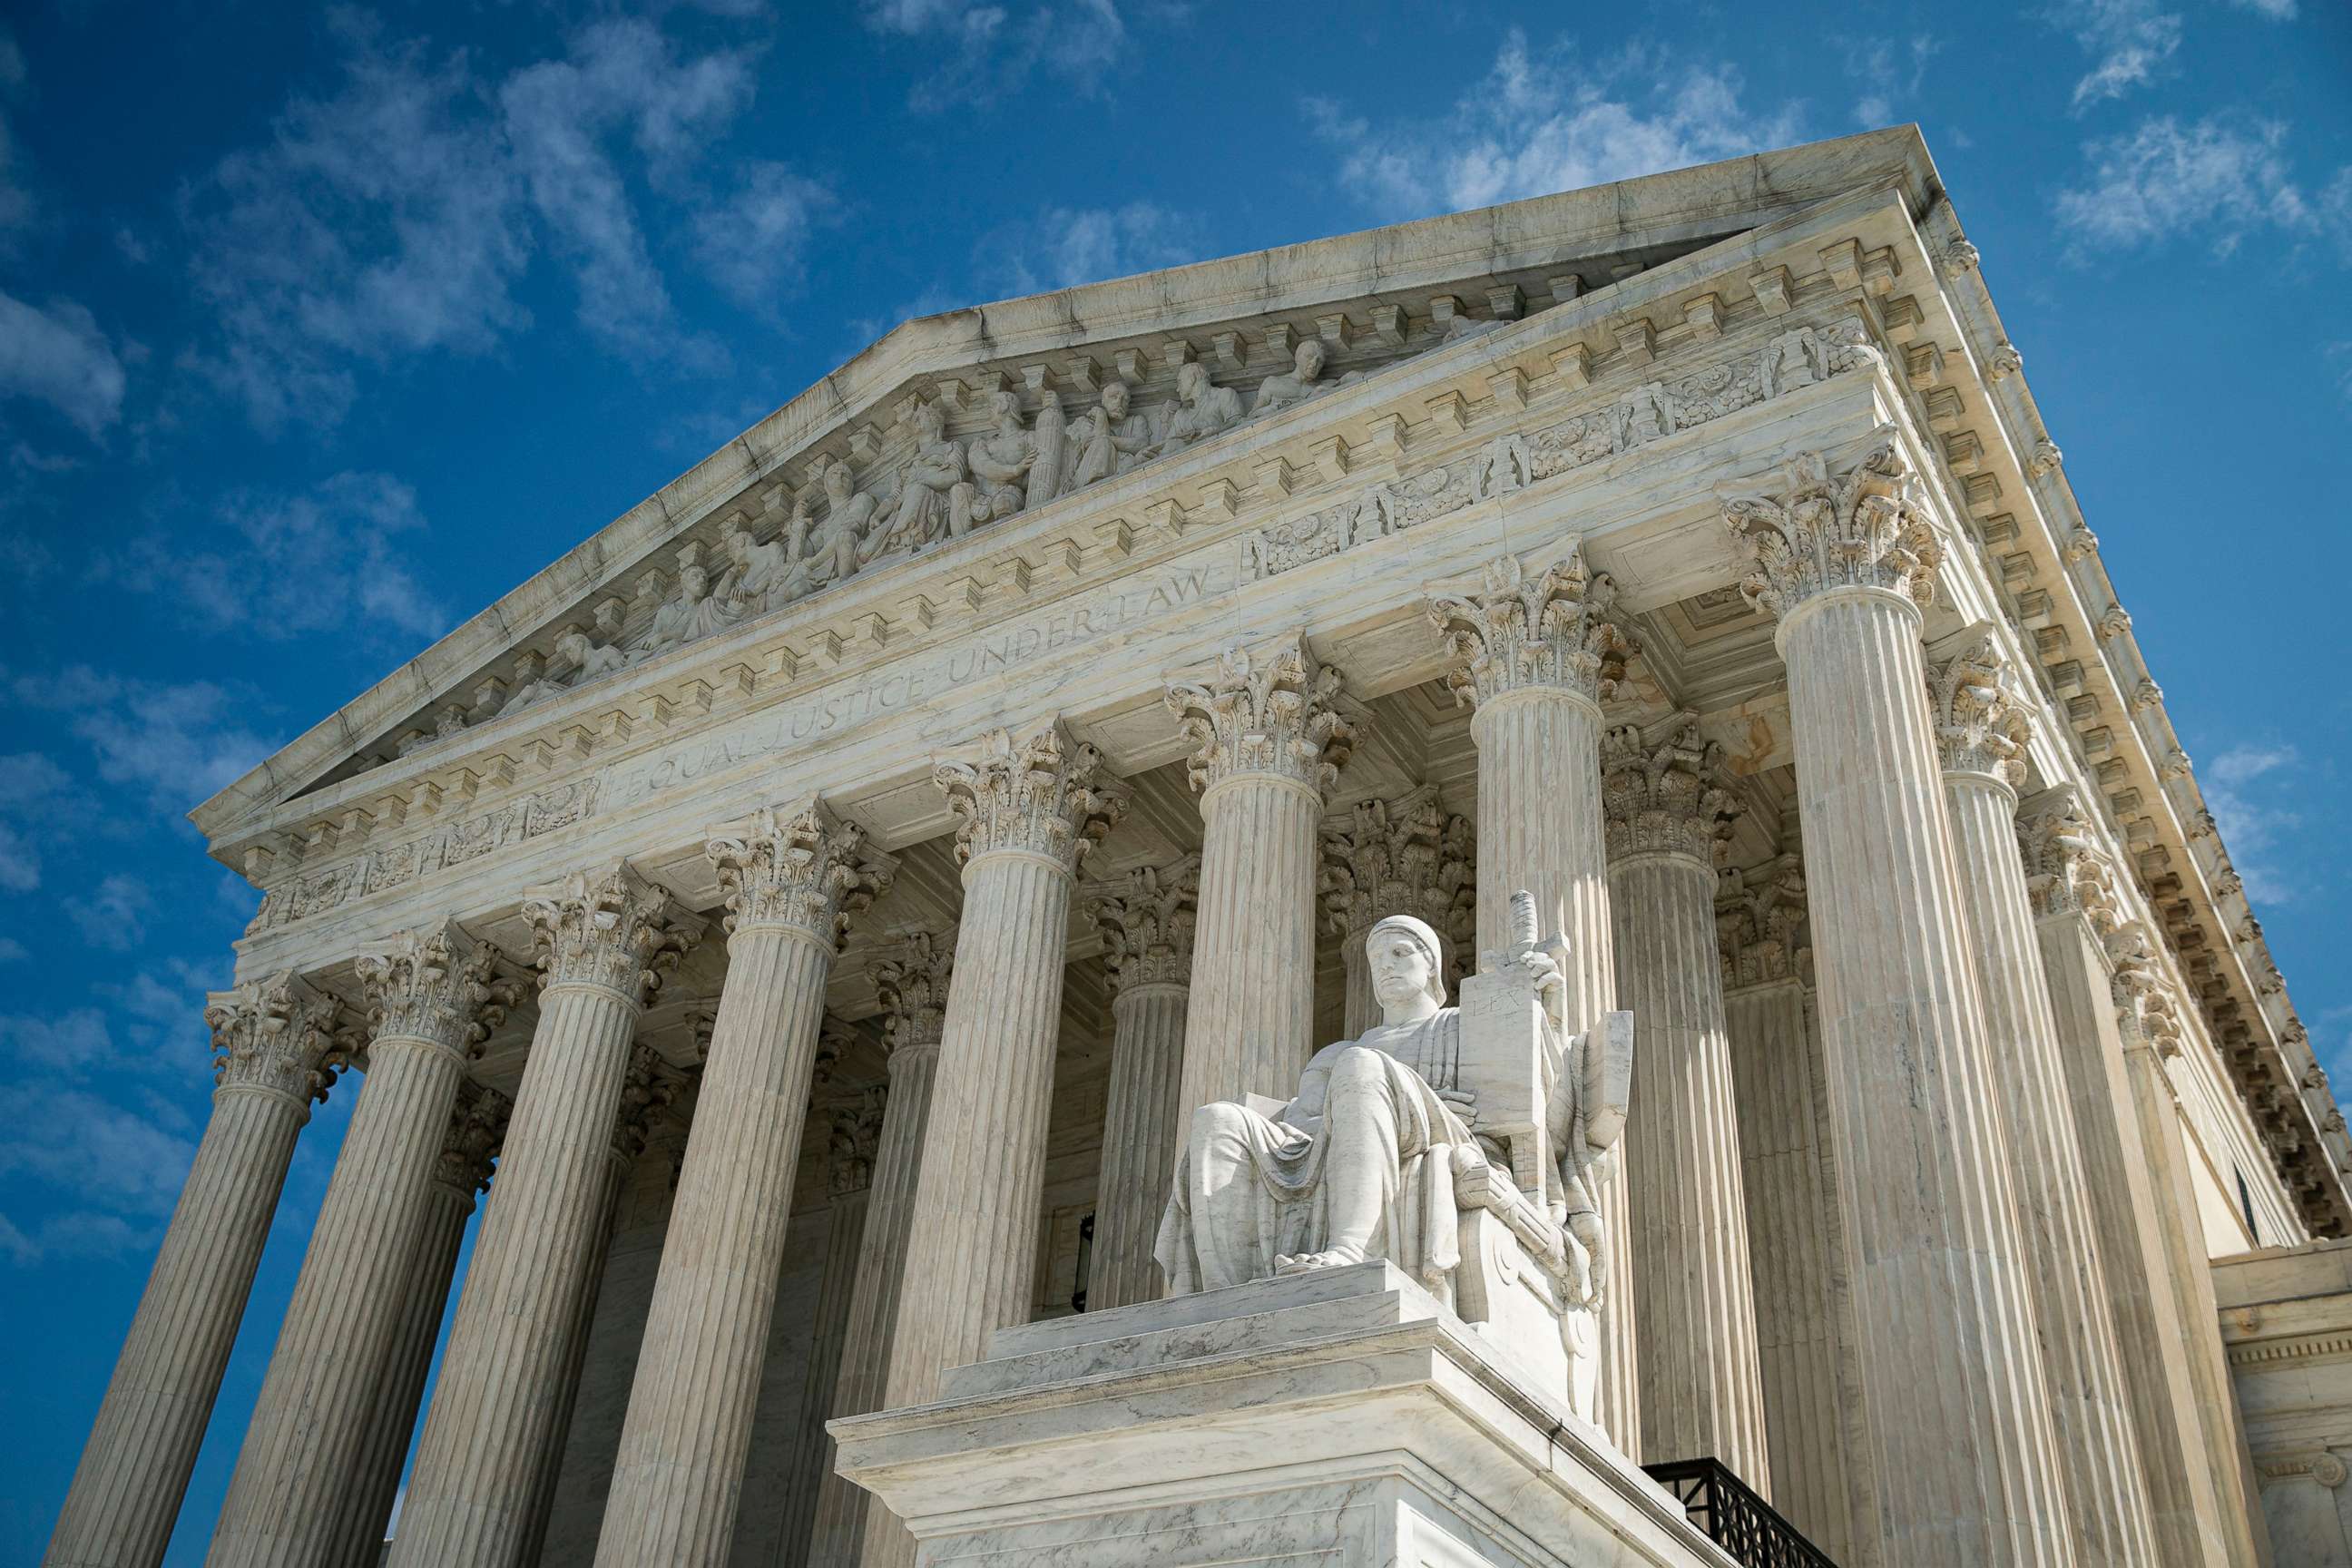 PHOTO: The Guardian or Authority of Law statue sits on the side of the U.S. Supreme Court on Sept. 28, 2020 in Washington, DC.